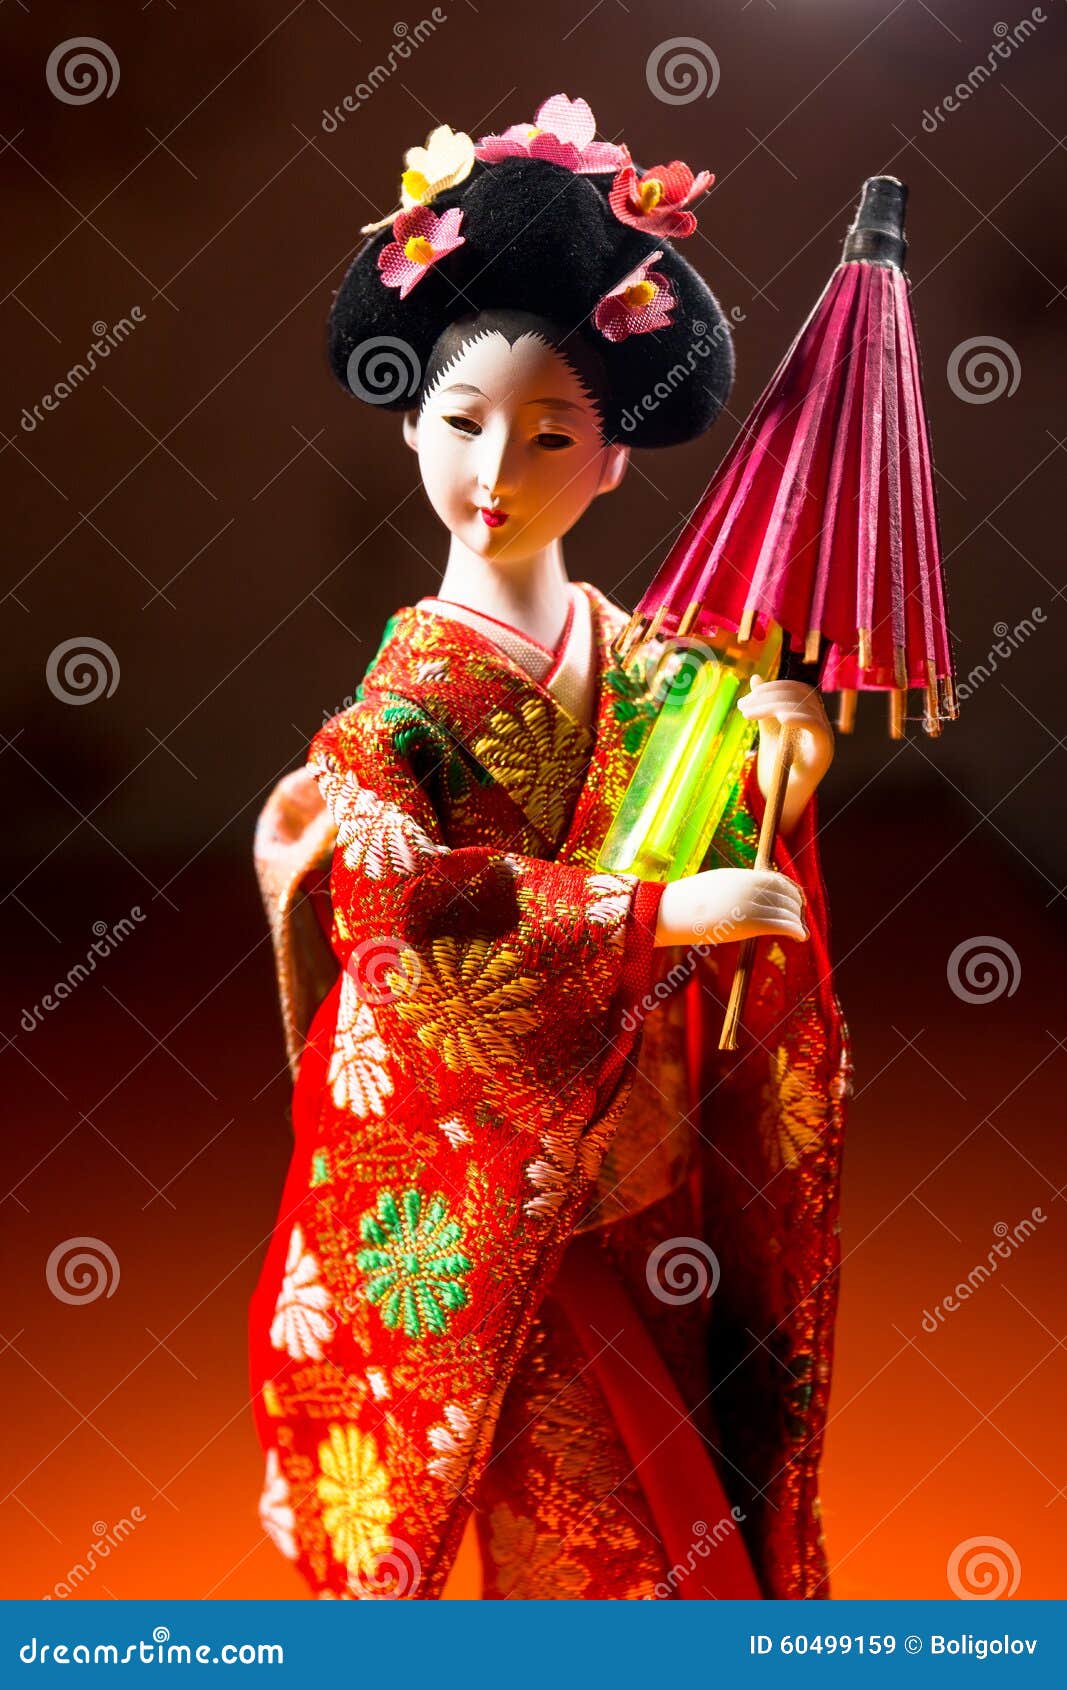 Japanese Female Kimono Doll Wearing Red Paper Umbrella With Flowers In ...